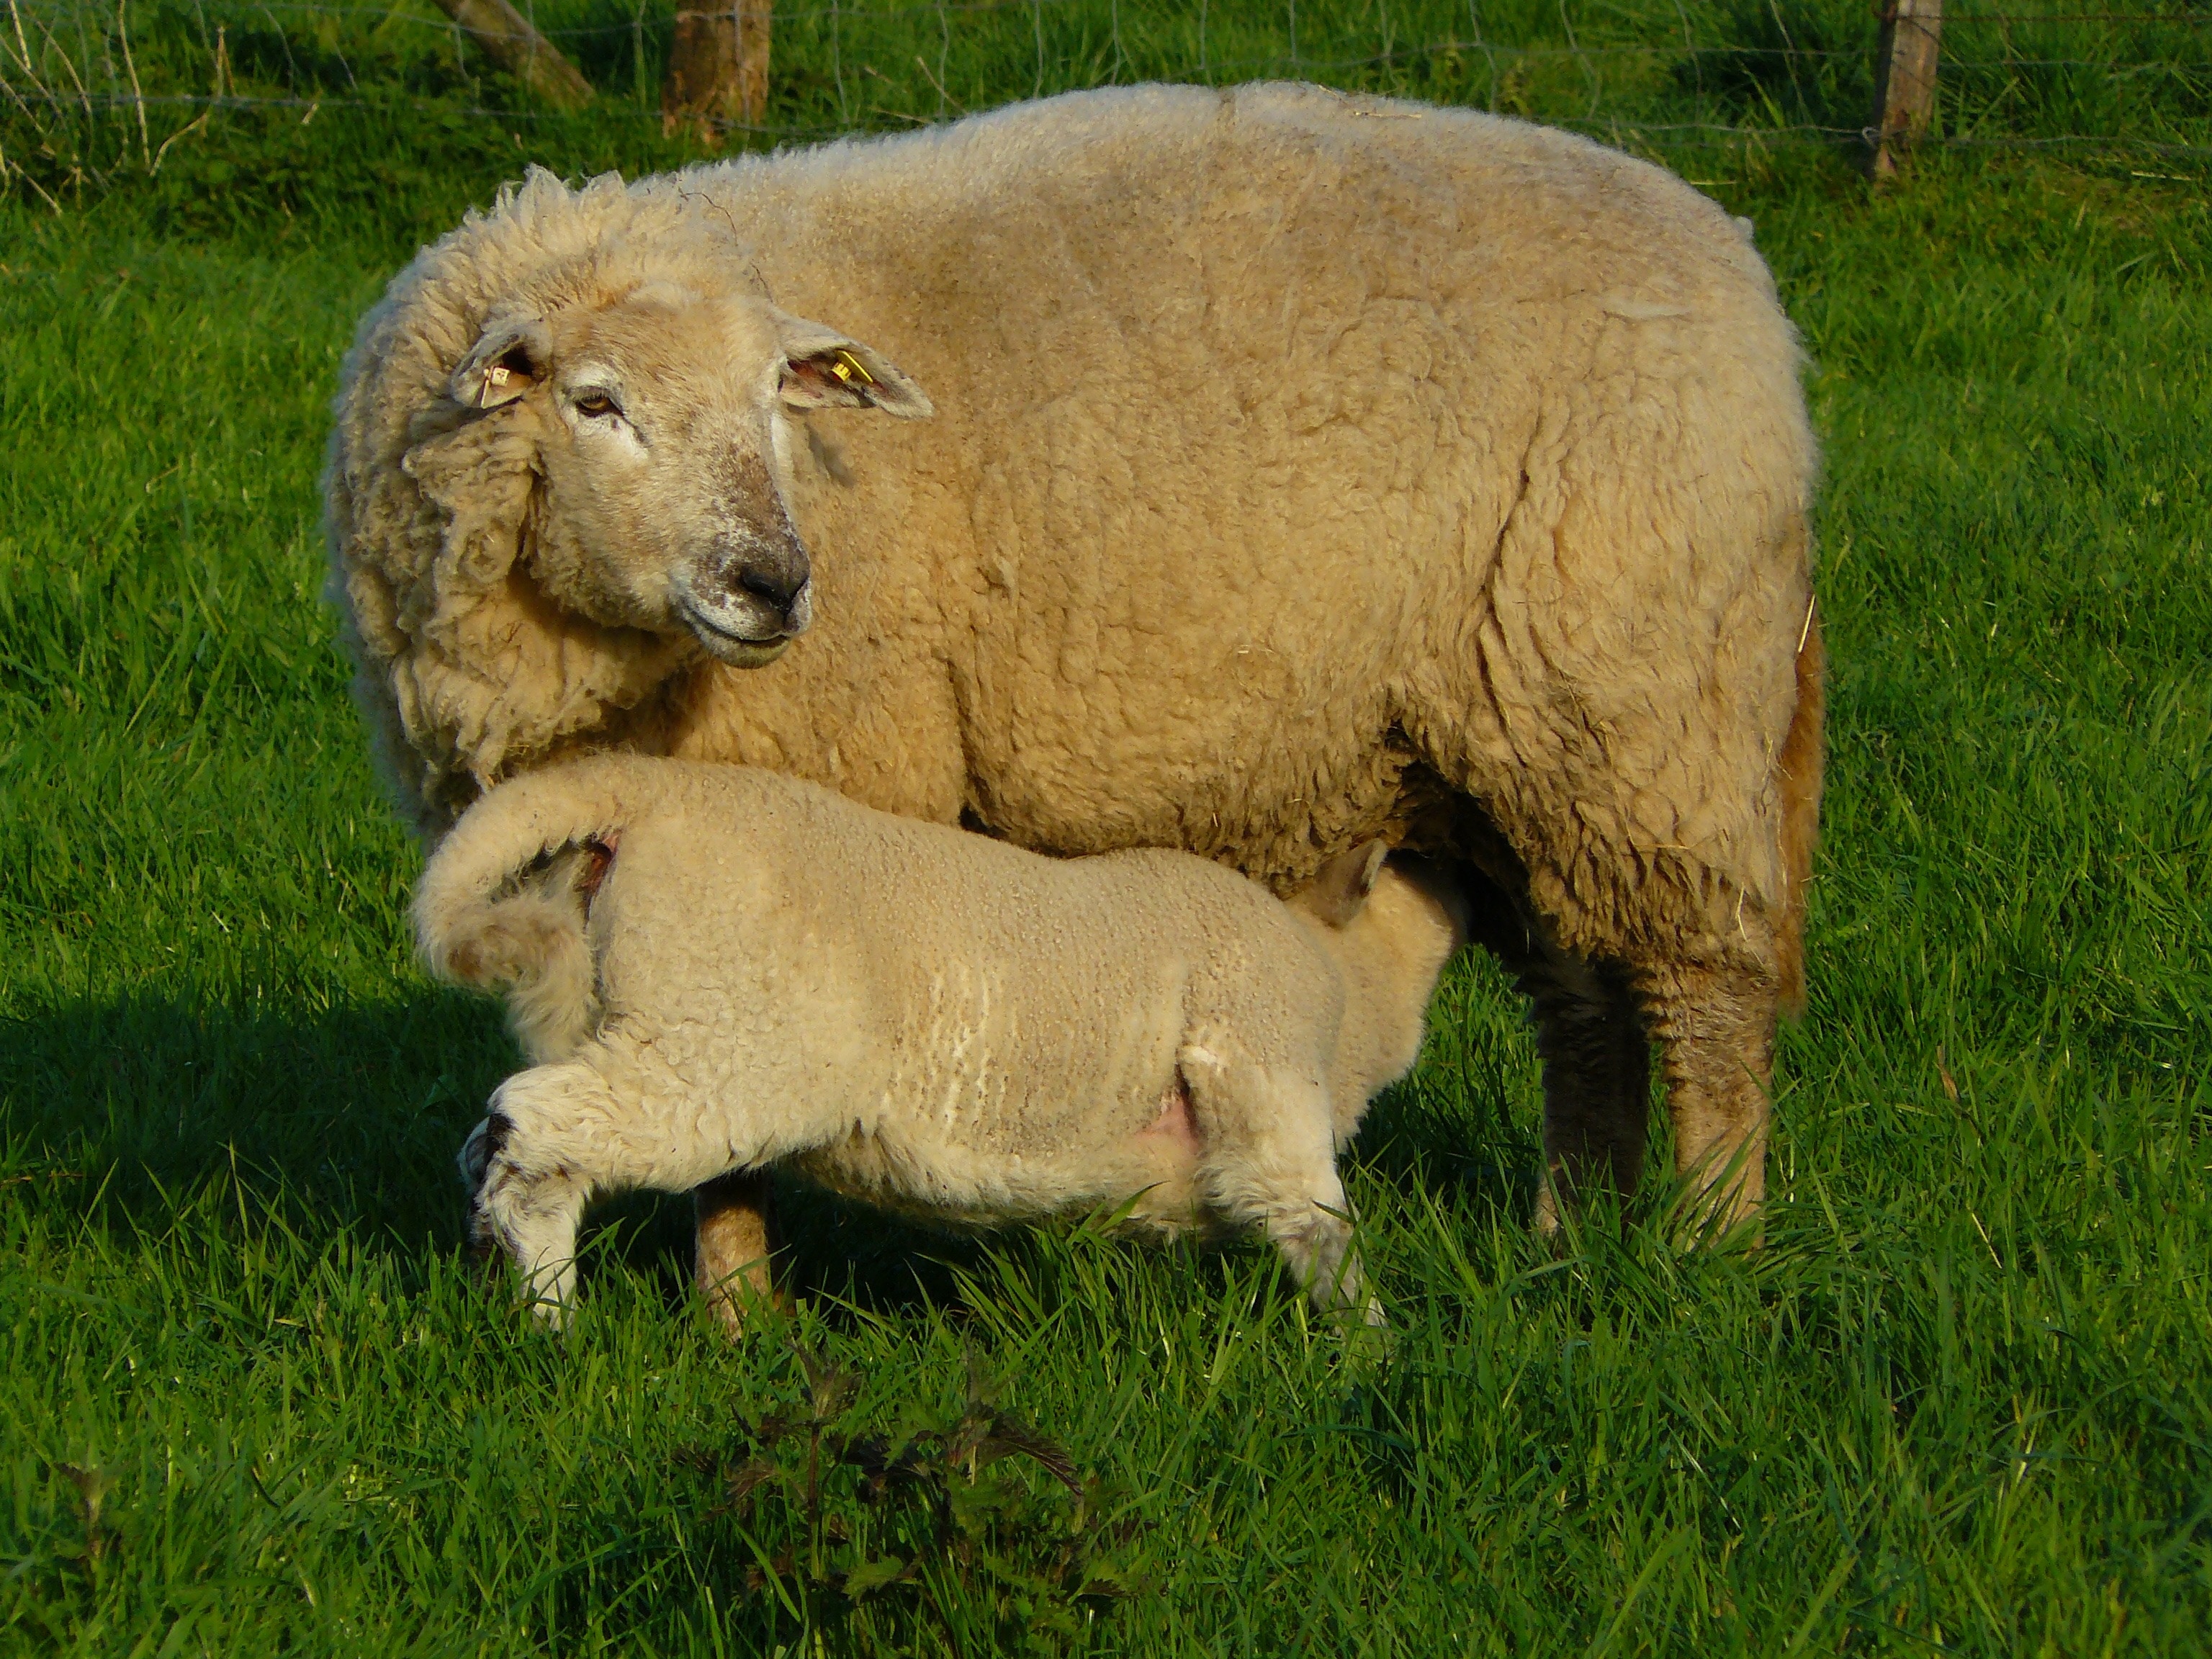 brown sheep and kid on green grass field during daytime